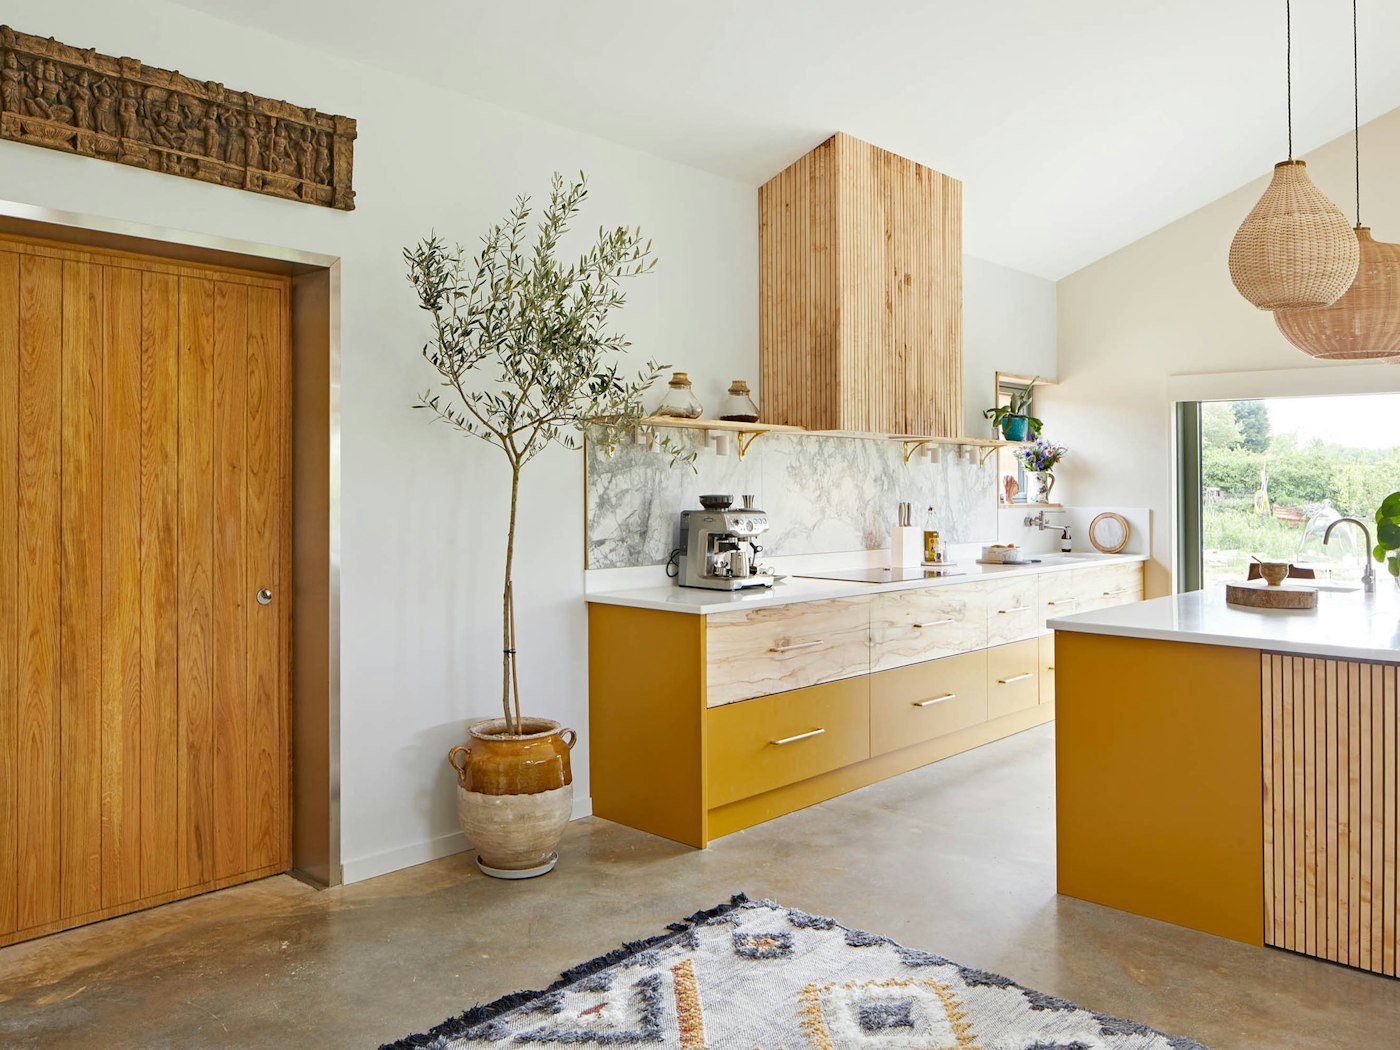 Internally, the door complements the stunning, handcrafted bespoke kitchen